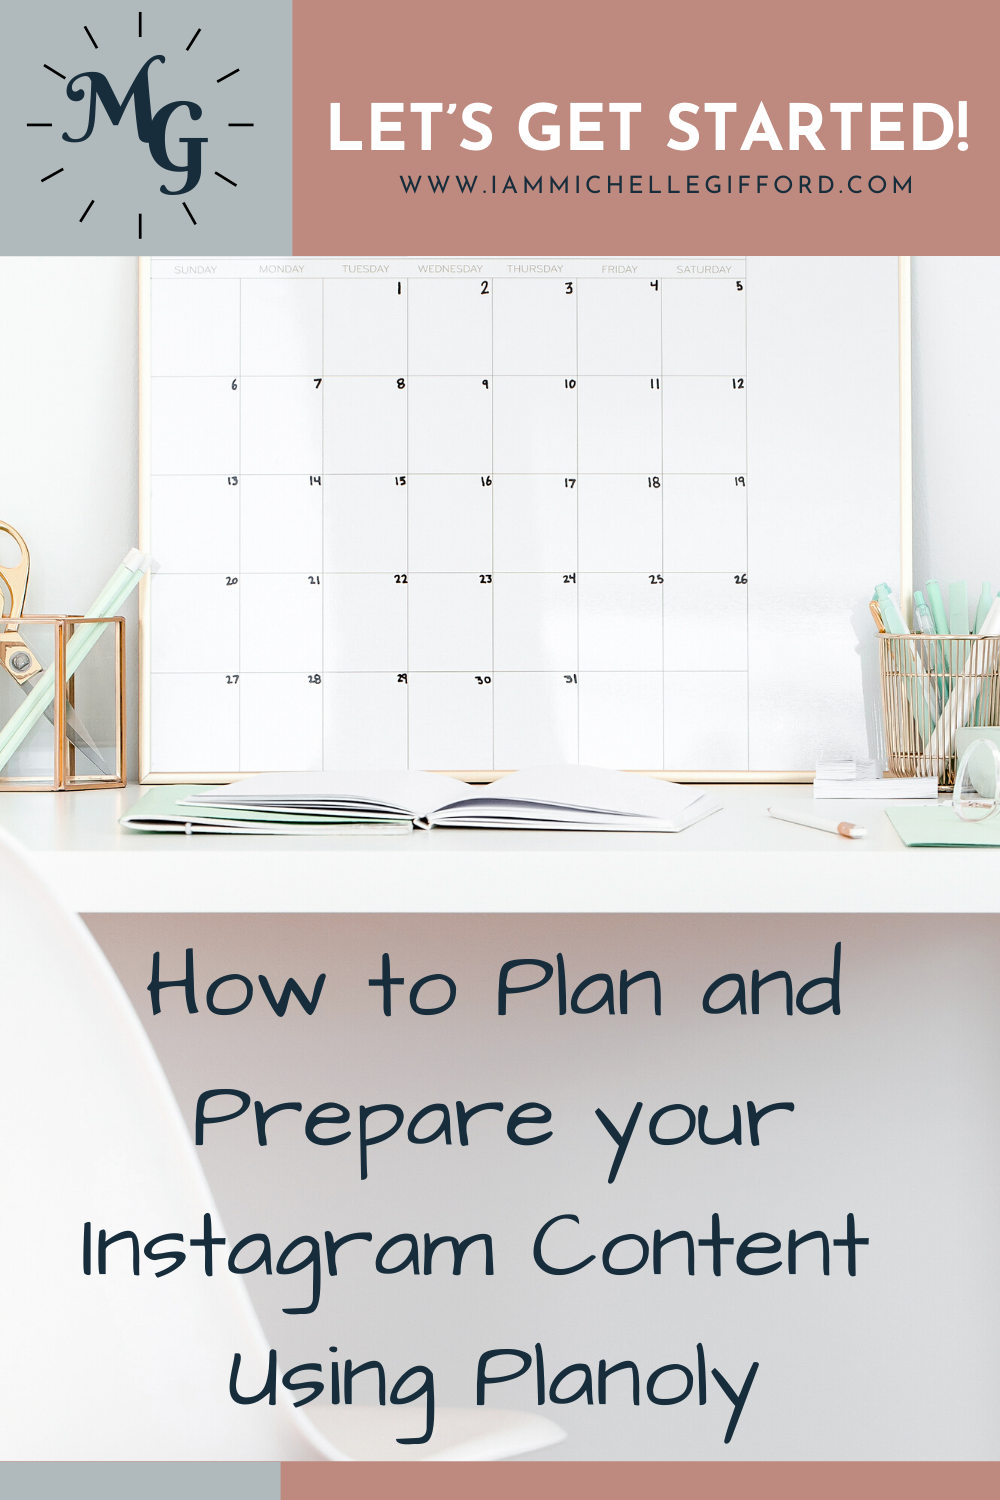 How to Get started with Planoly Plan and Prepare Instagram Content www.iammichellegifford.com